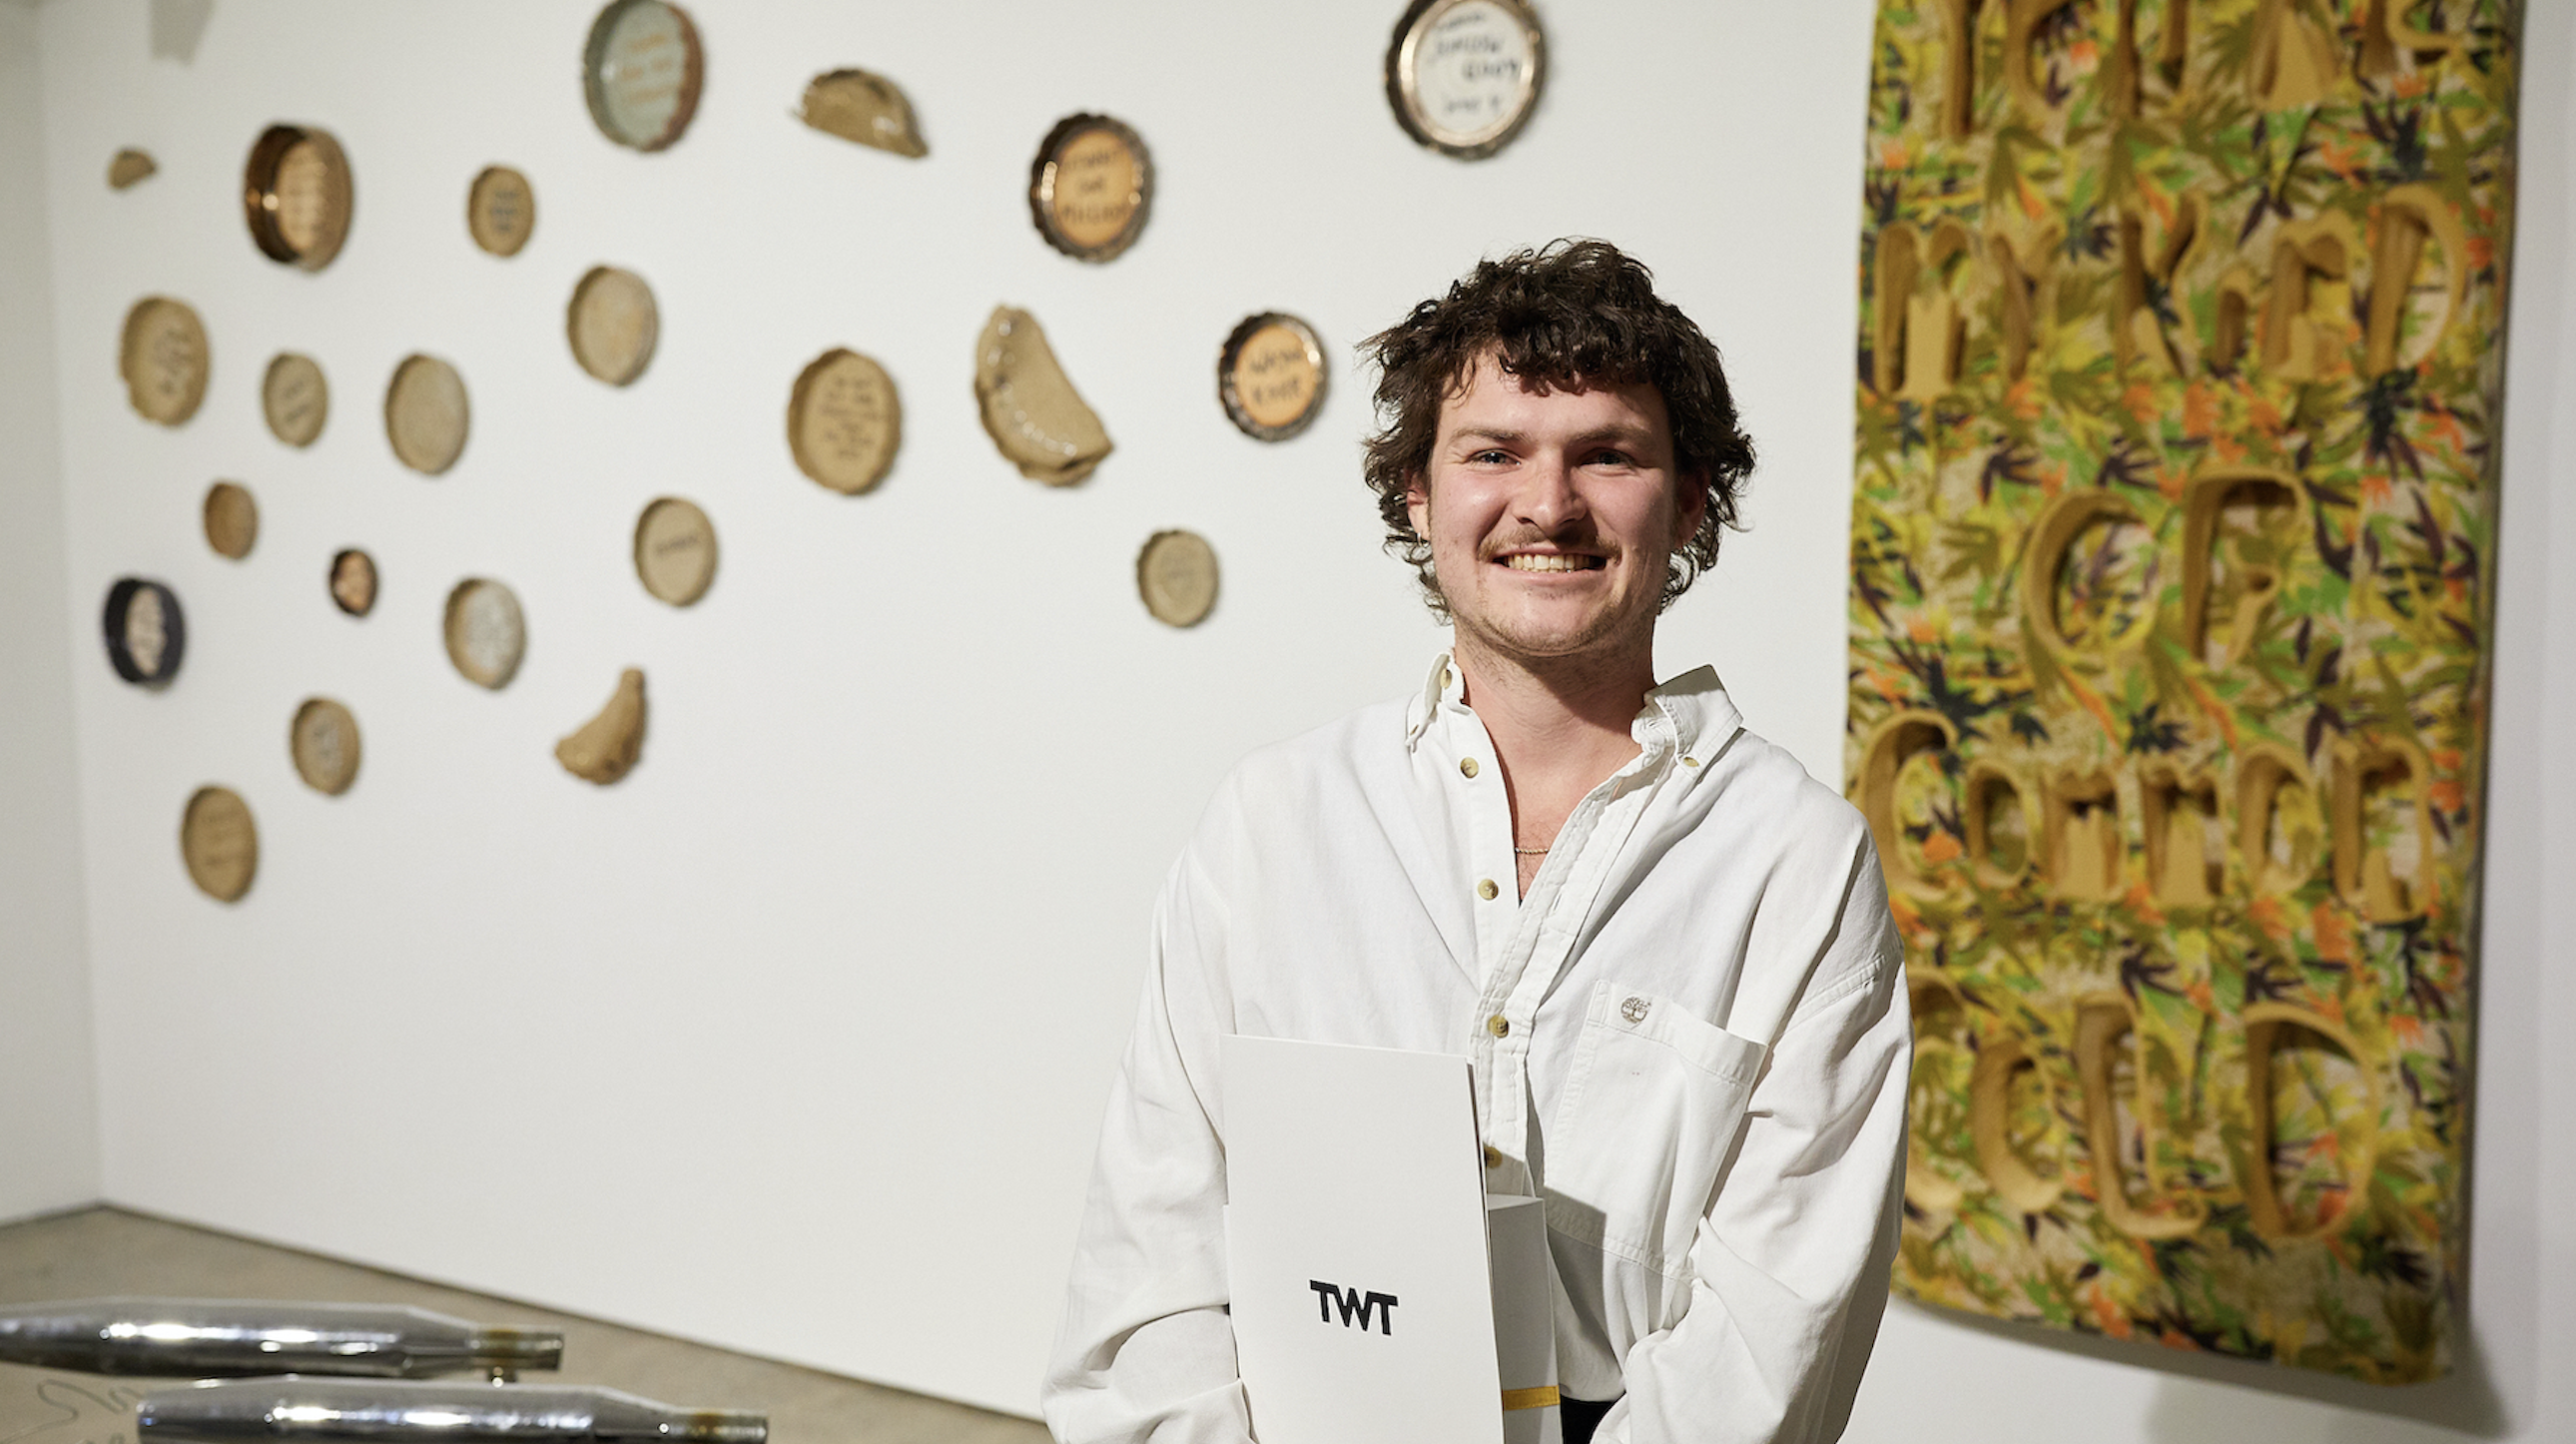 Sydney-based sculptor Joshua Reeves wins the TWT Excellence Prize